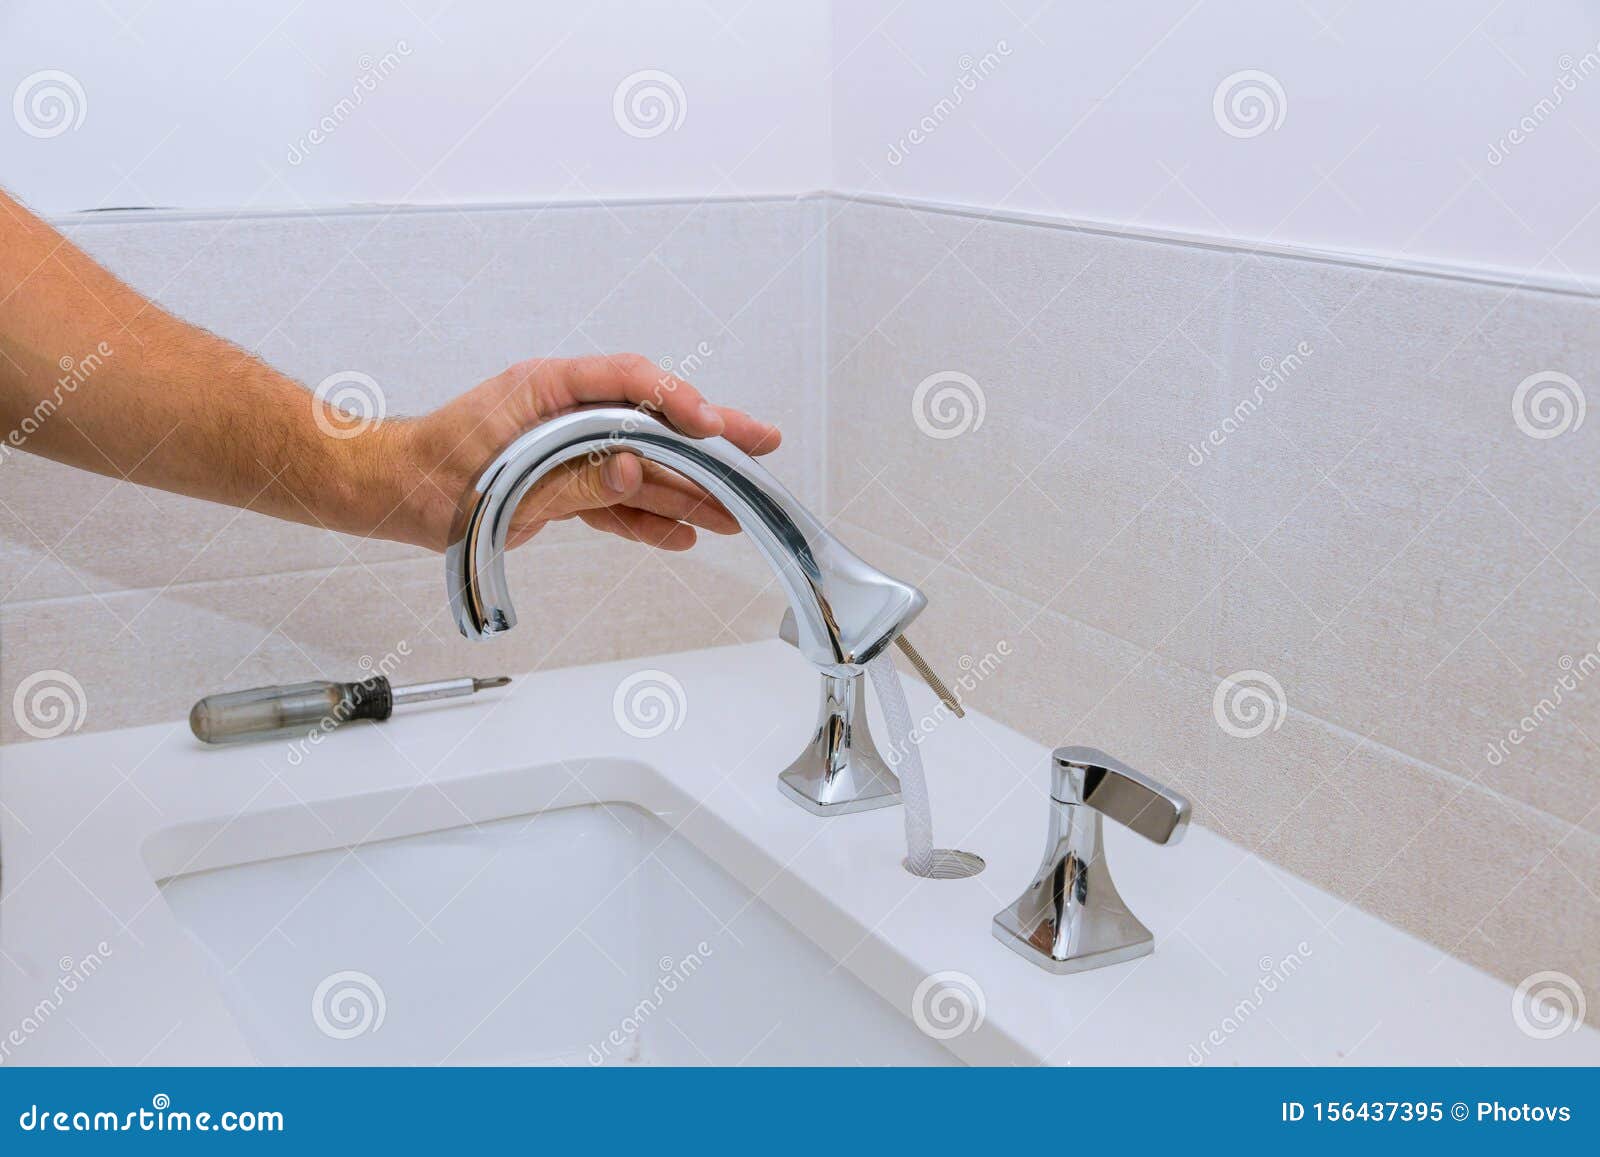 Repair Service Assemble New Faucet Lies On The Ceramic Sink Stock